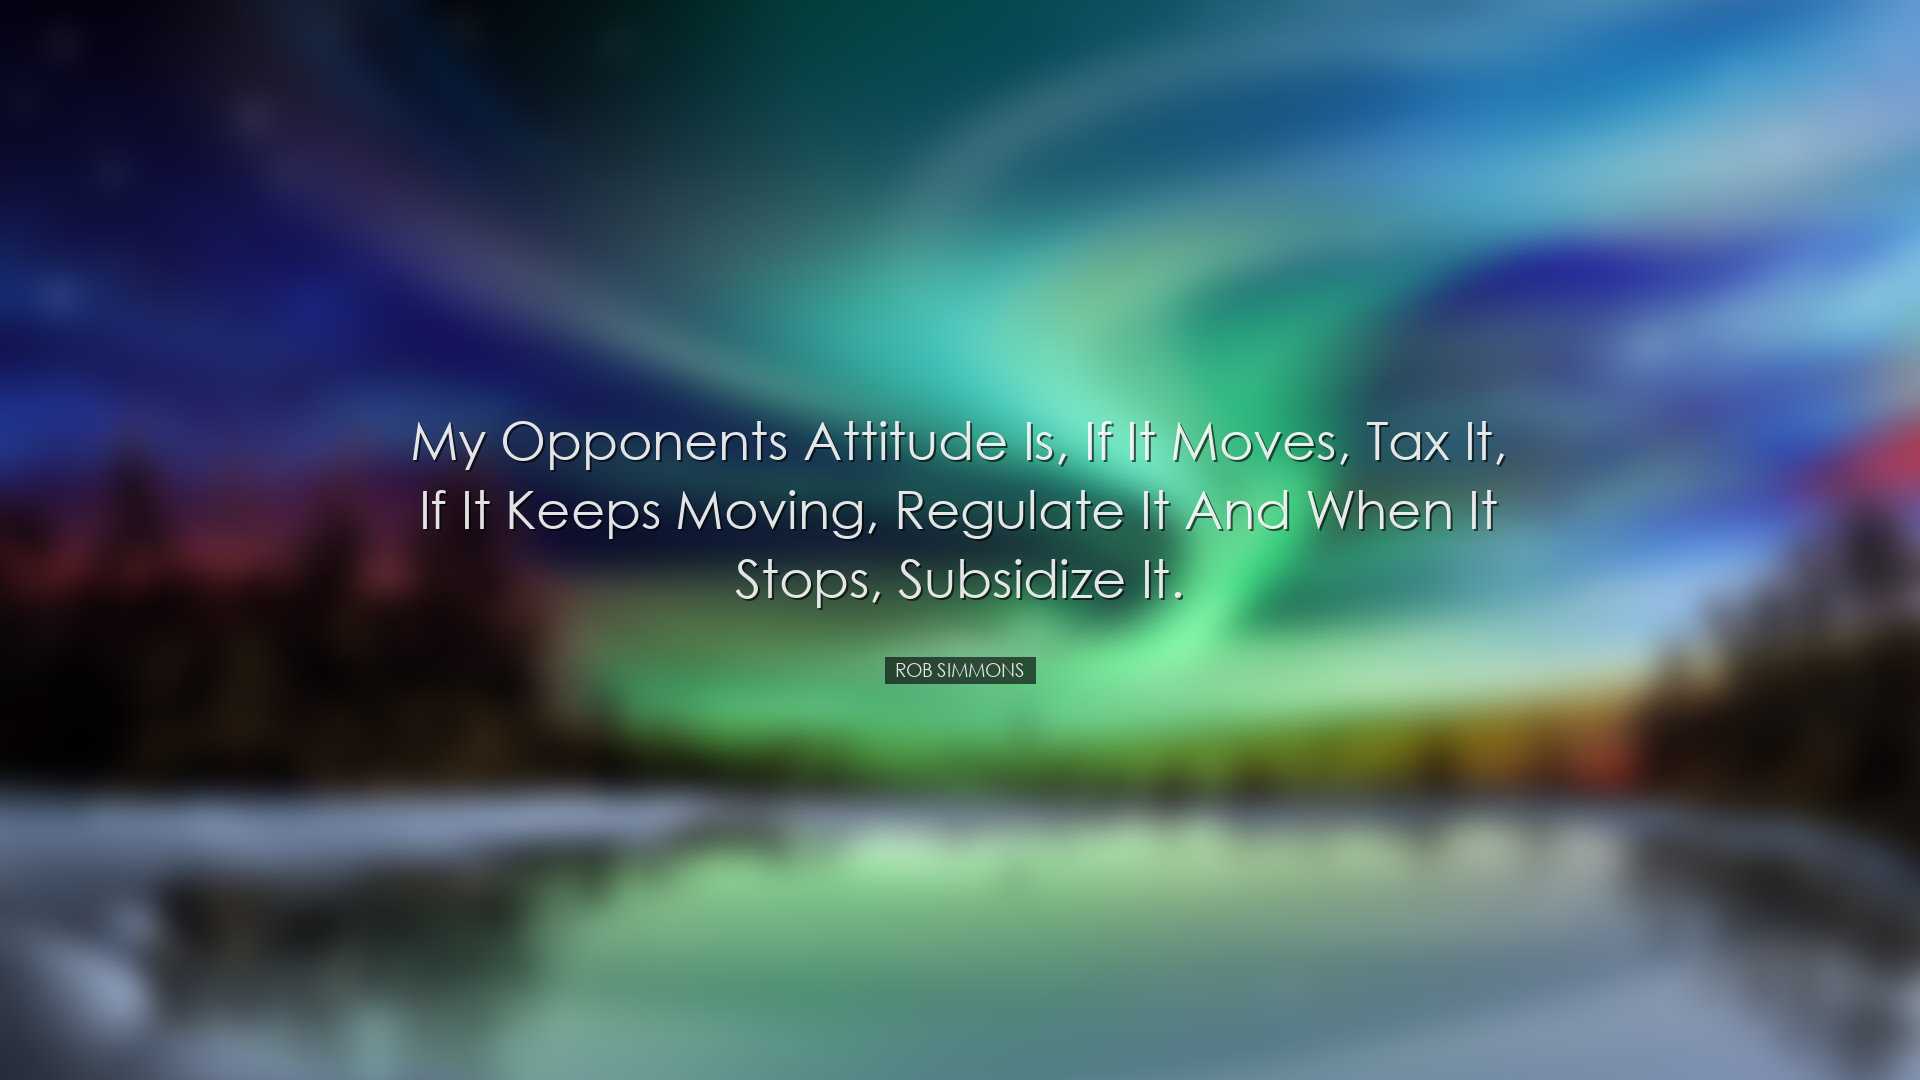 My opponents attitude is, If it moves, tax it, if it keeps moving,